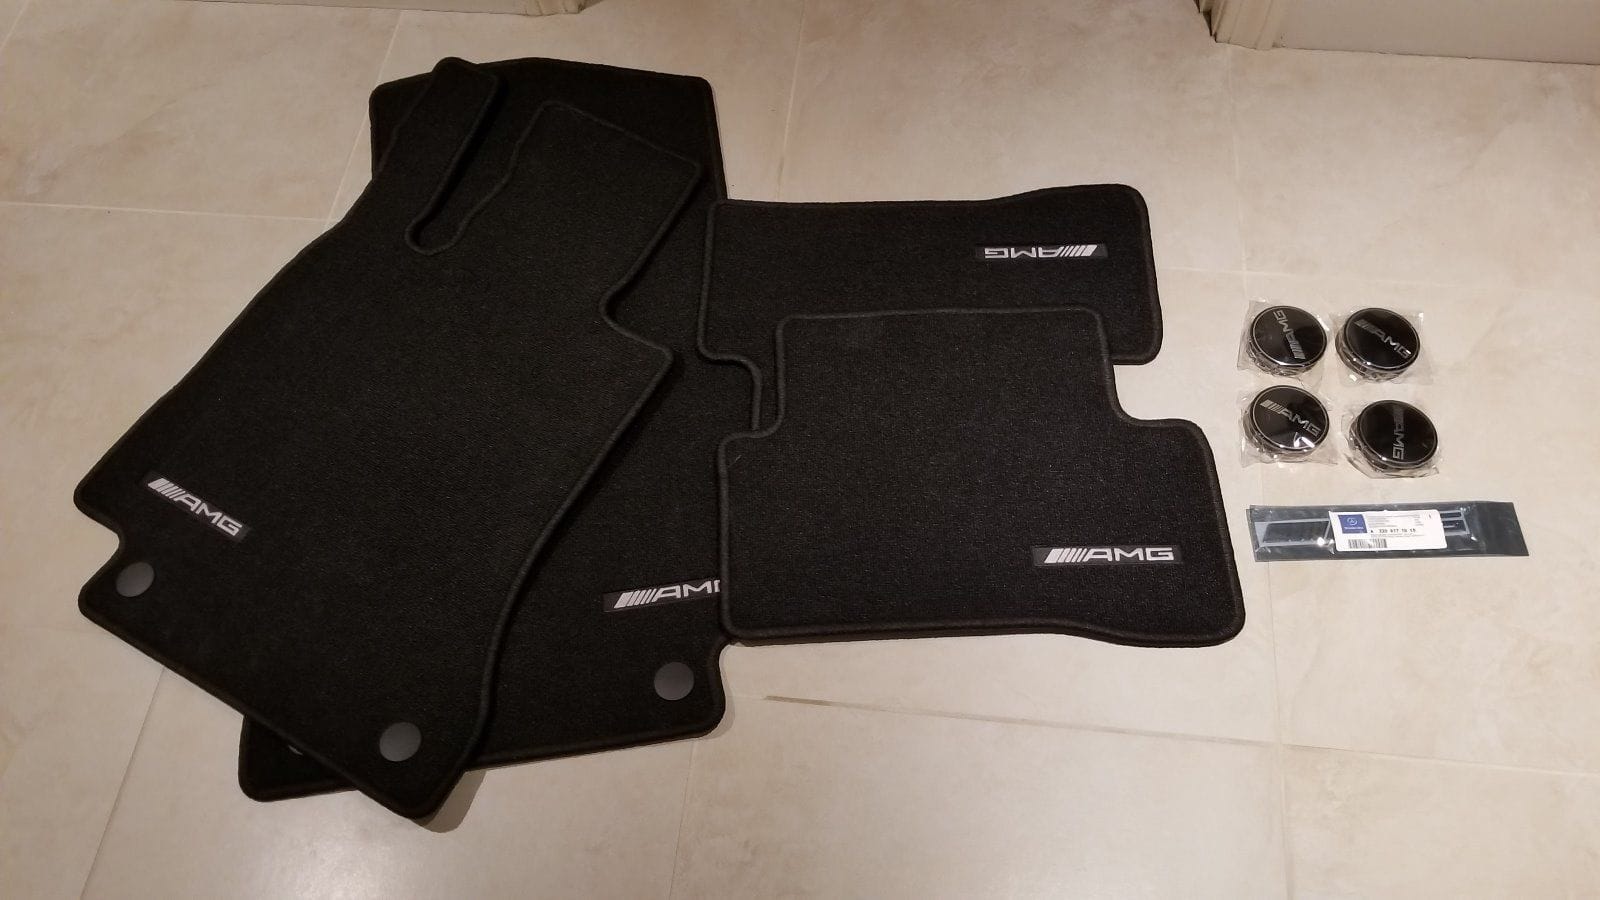 Interior/Upholstery - Brand new front and rear AMG carpet set never used from 2016 Mercedes C450AMG plus - New - 2016 to 2017 Mercedes-Benz C450 AMG - East Greenwich, RI 02818, United States